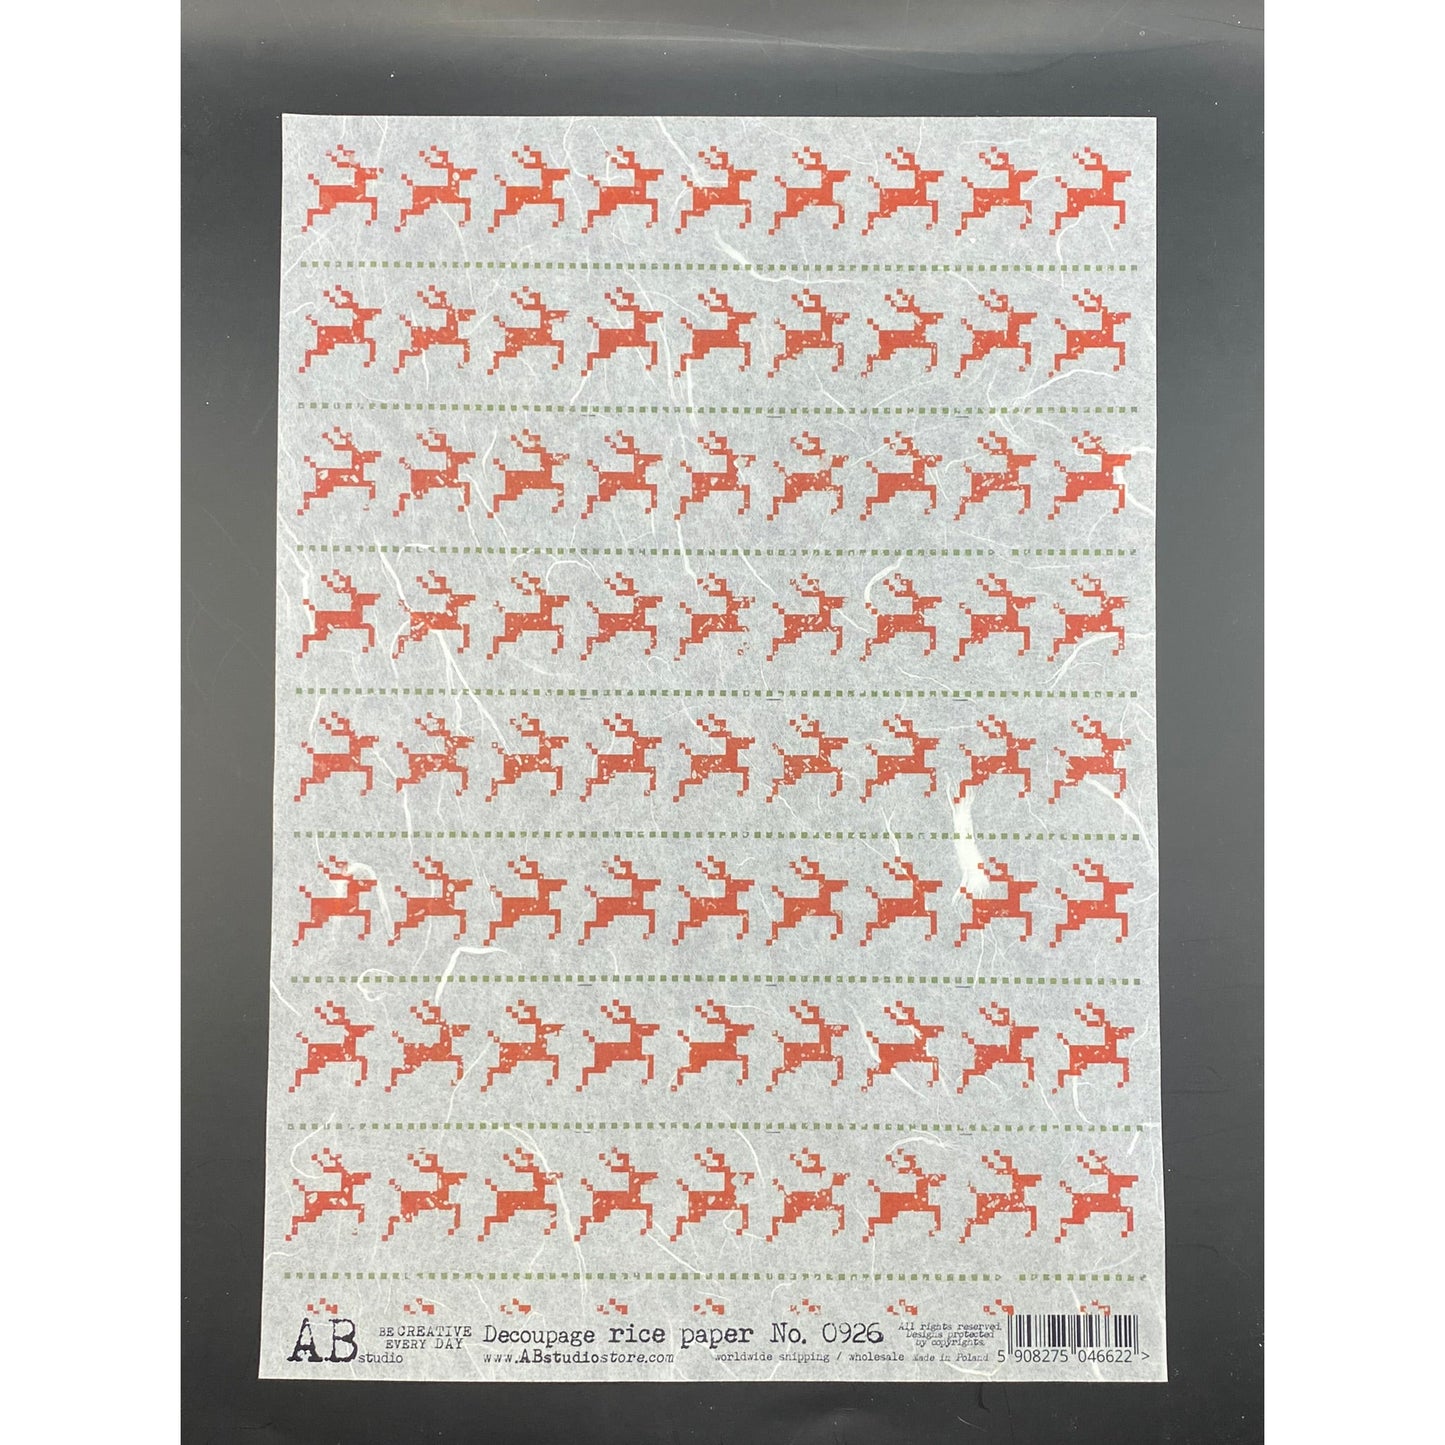 0003 - 6 Rice Papers - AB Studios A Simple Christmas Story - 6 Pages Total - Animals, Ornaments, Christmas Background